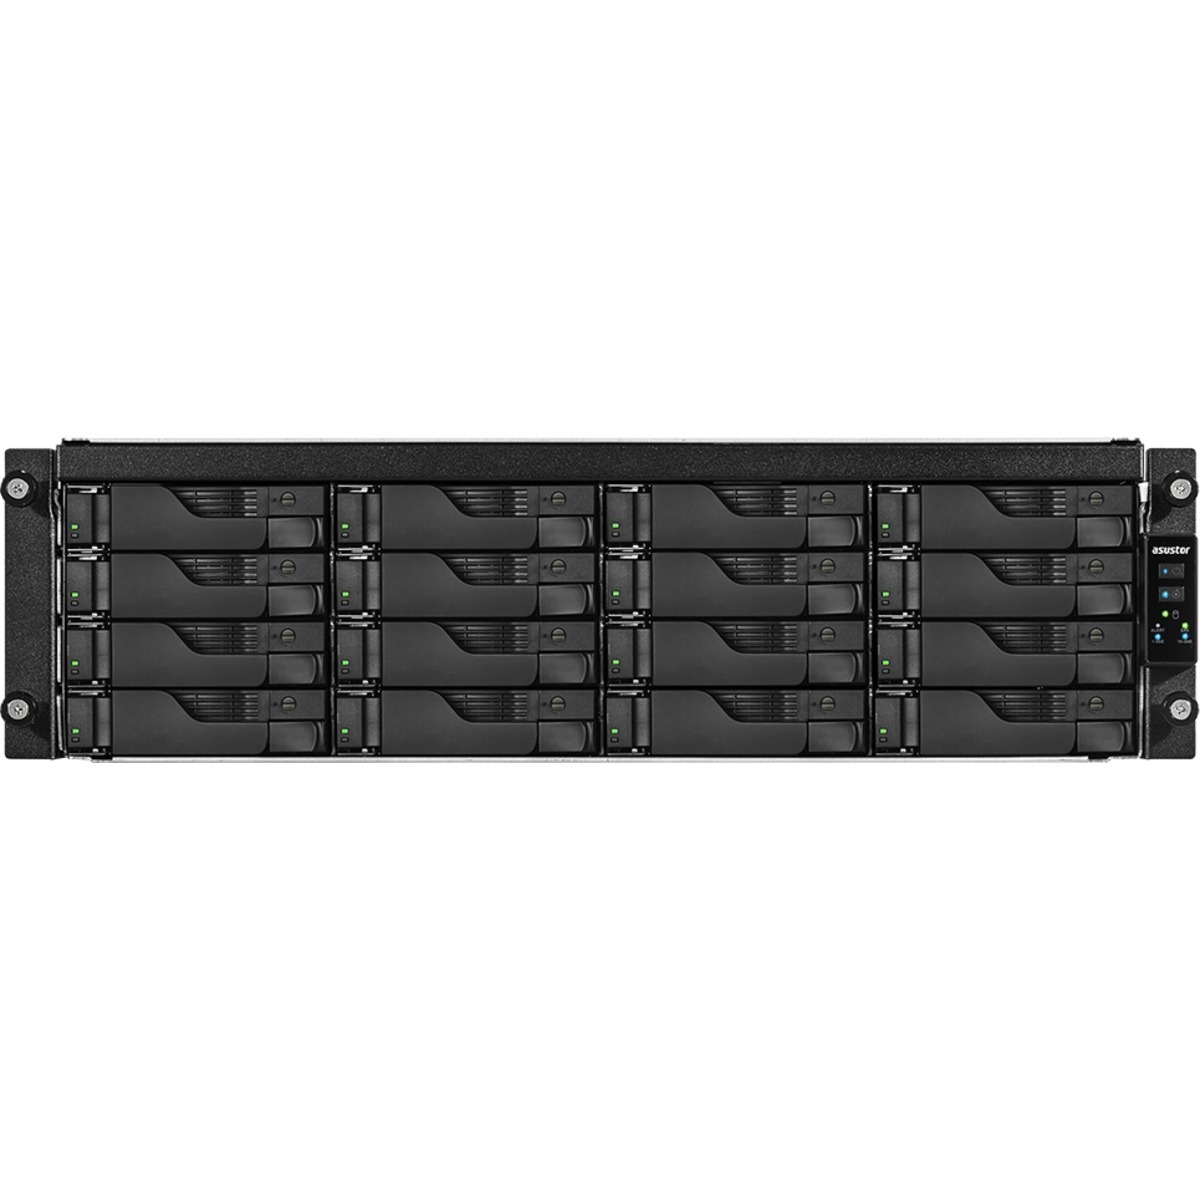 ASUSTOR AS7116RDX Lockerstor 16R Pro 252tb 16-Bay RackMount Large Business / Enterprise NAS - Network Attached Storage Device 14x18tb Toshiba Enterprise Capacity MG09ACA18TE 3.5 7200rpm SATA 6Gb/s HDD ENTERPRISE Class Drives Installed - Burn-In Tested AS7116RDX Lockerstor 16R Pro